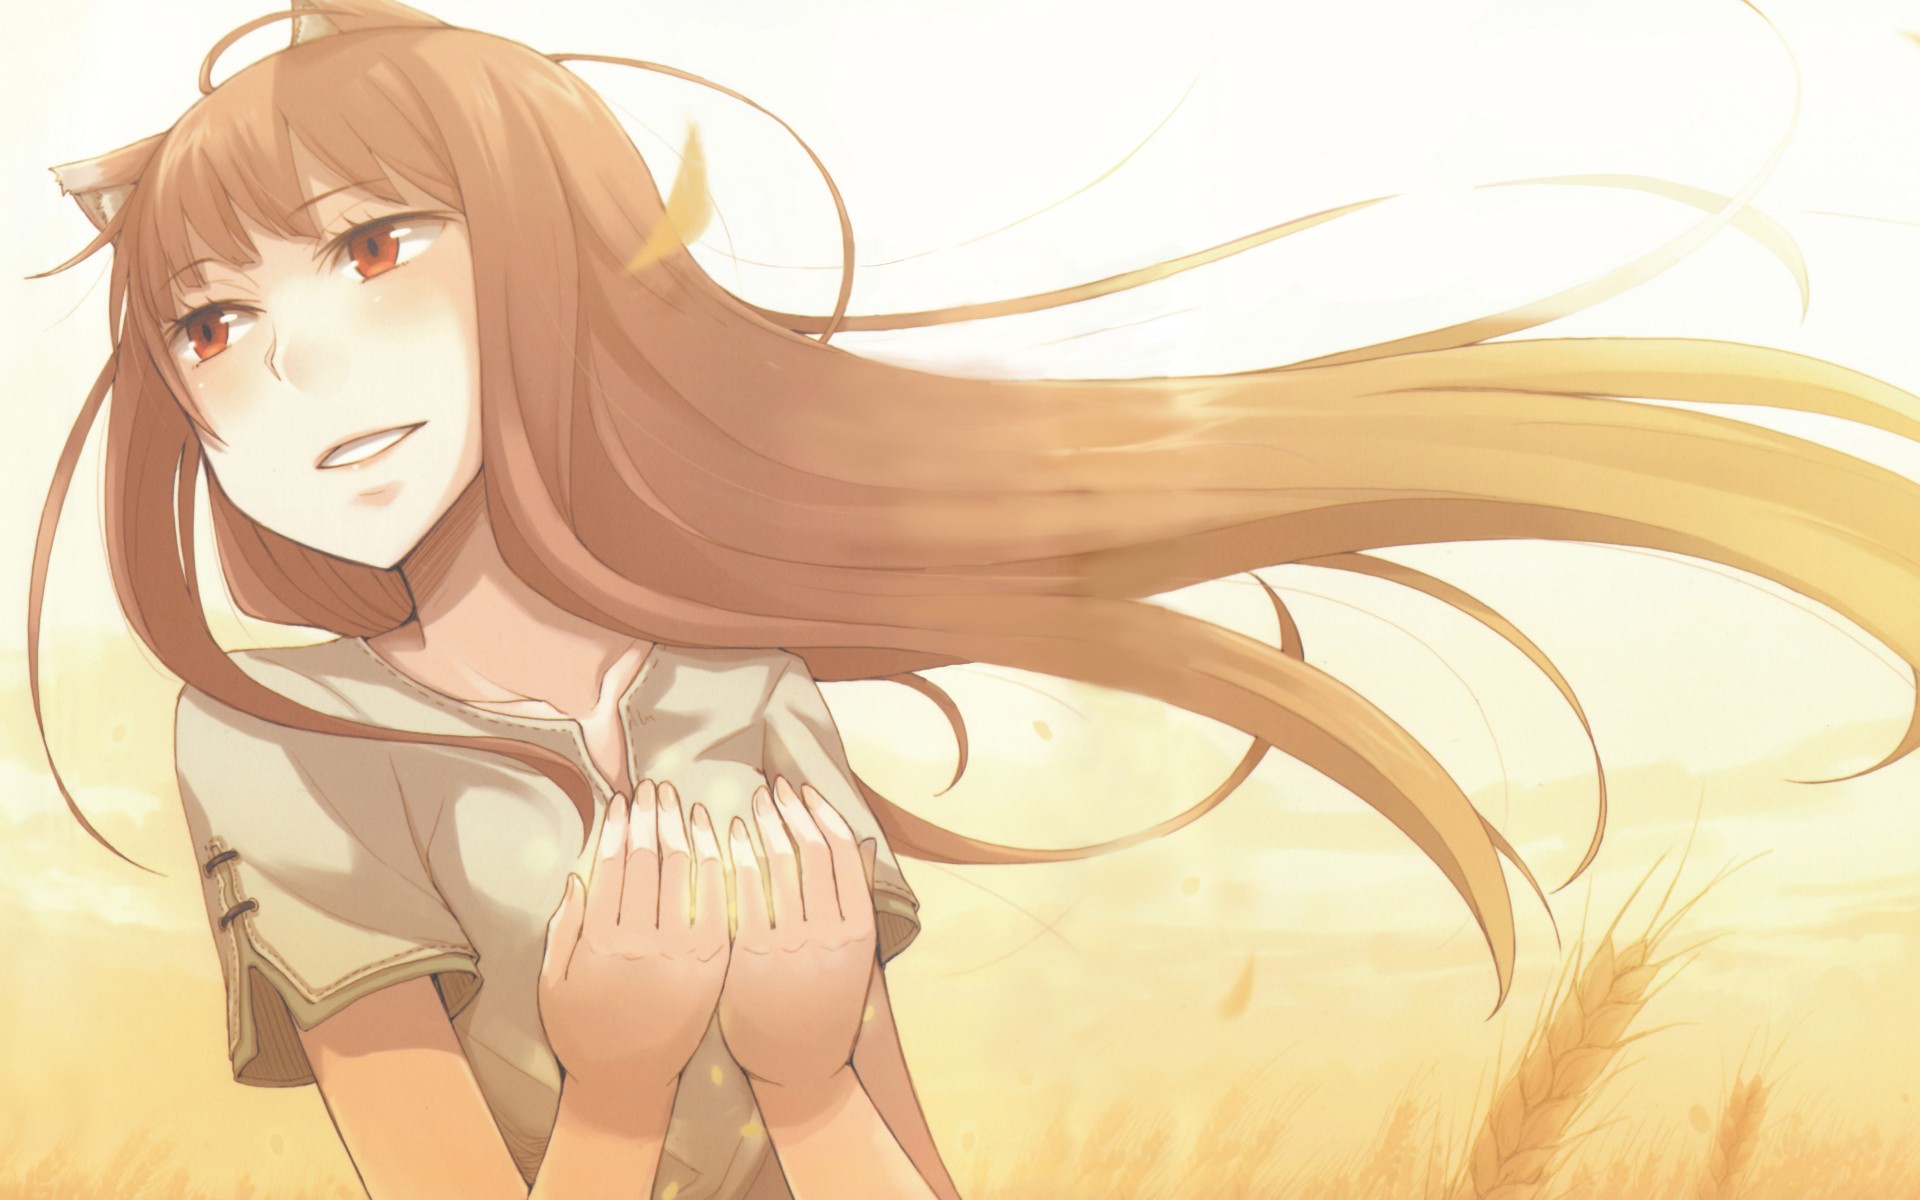 Spice And Wolf, Anime Girls Wallpaper